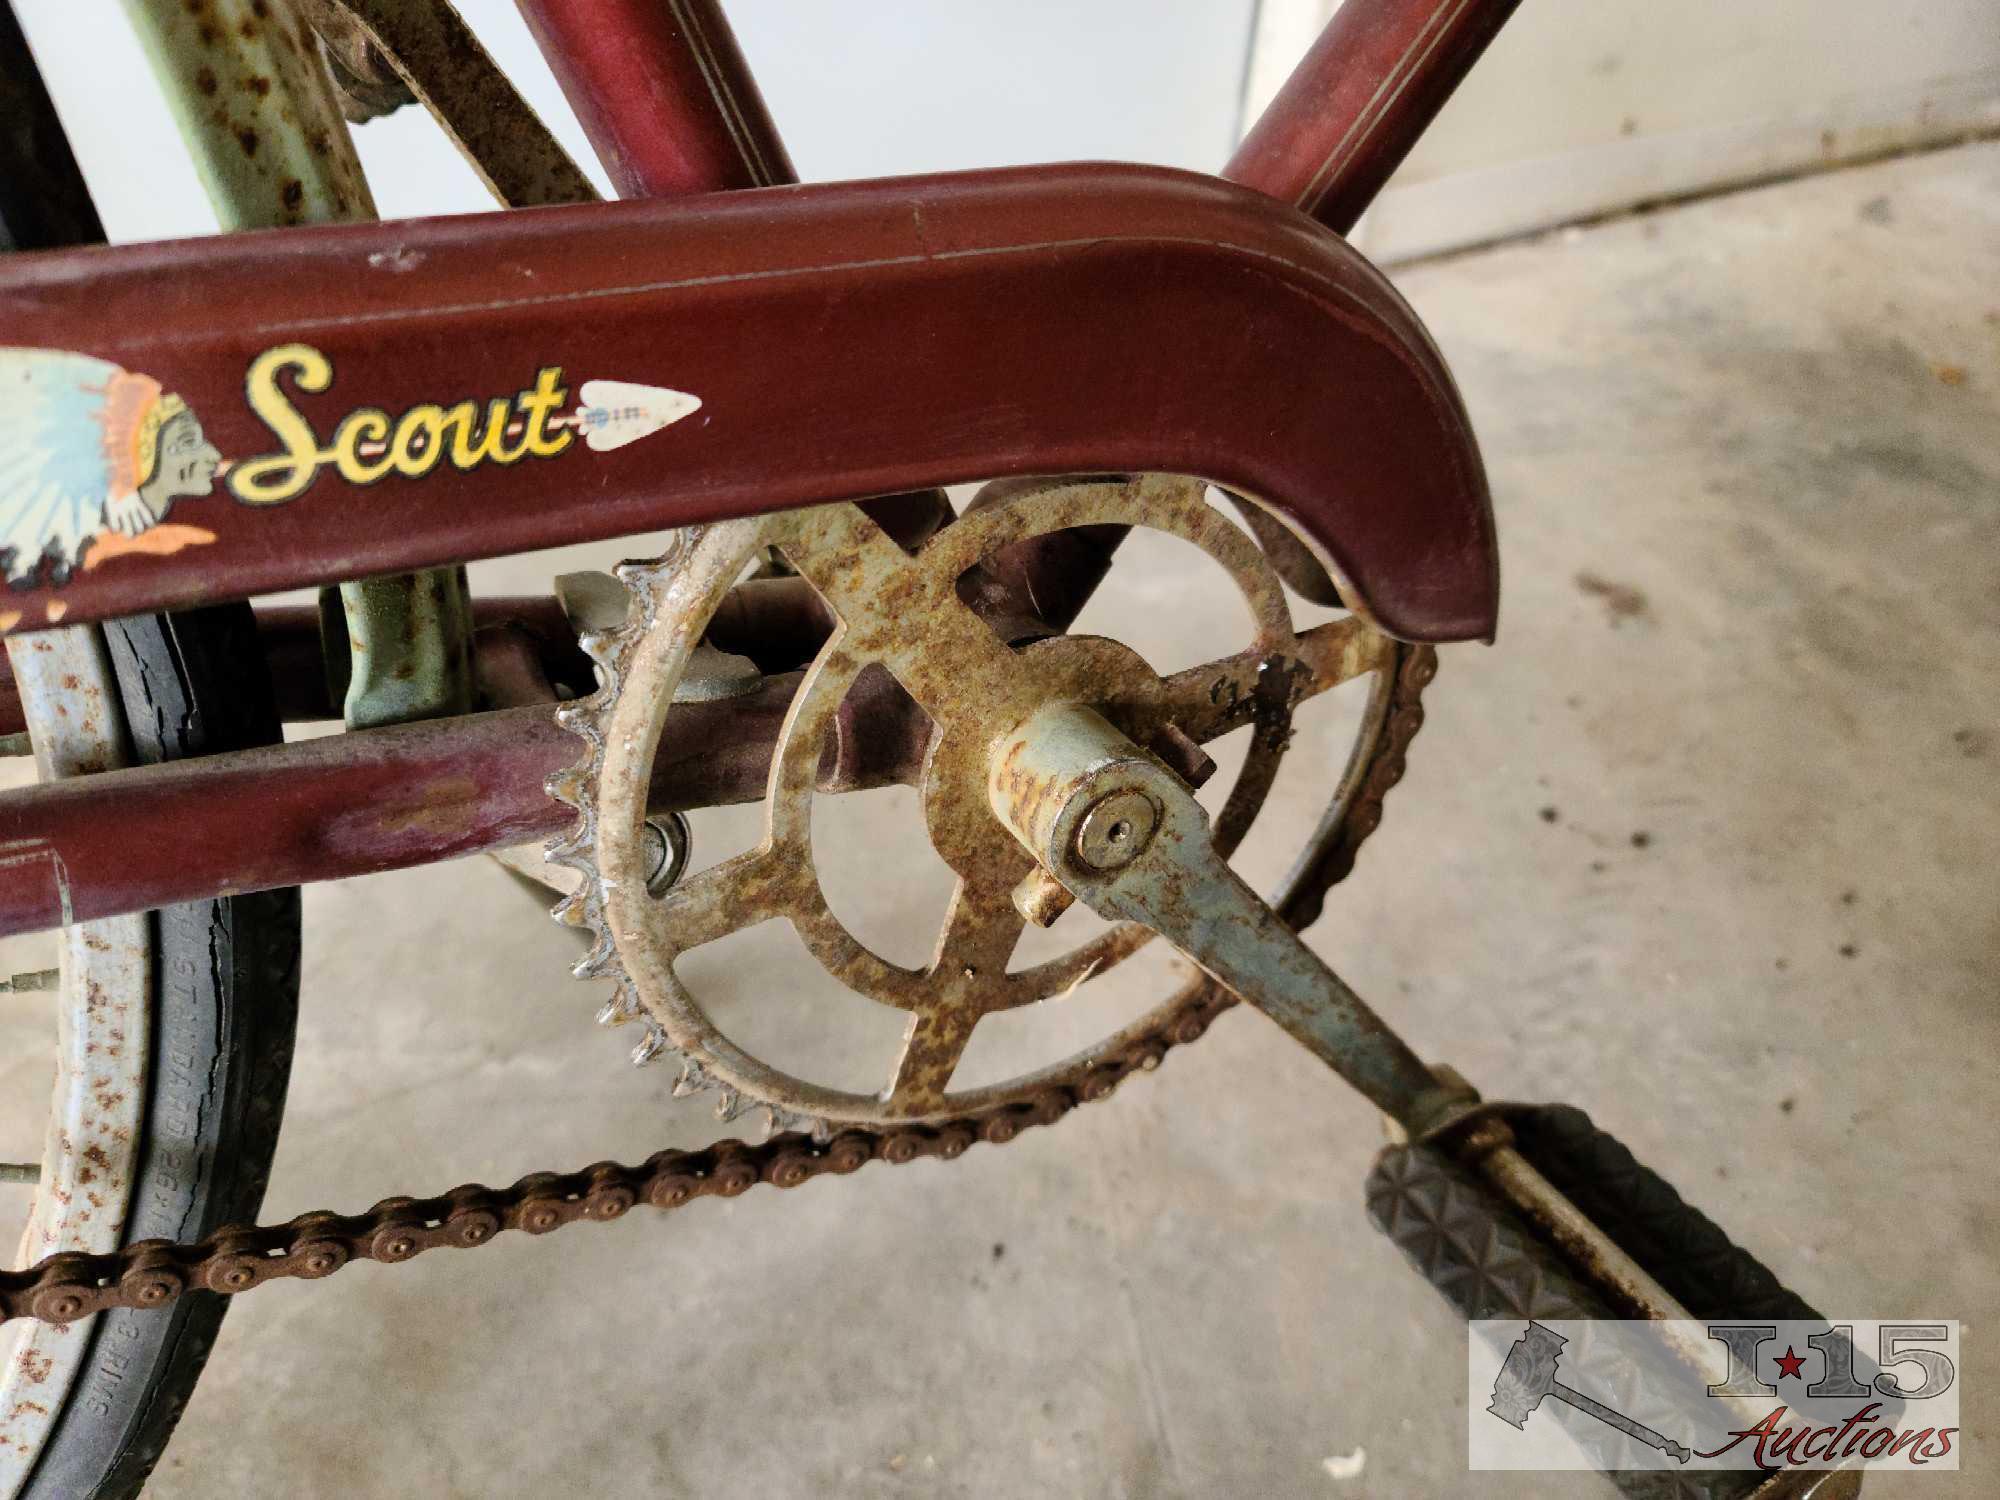 Indian Scout Bicycle